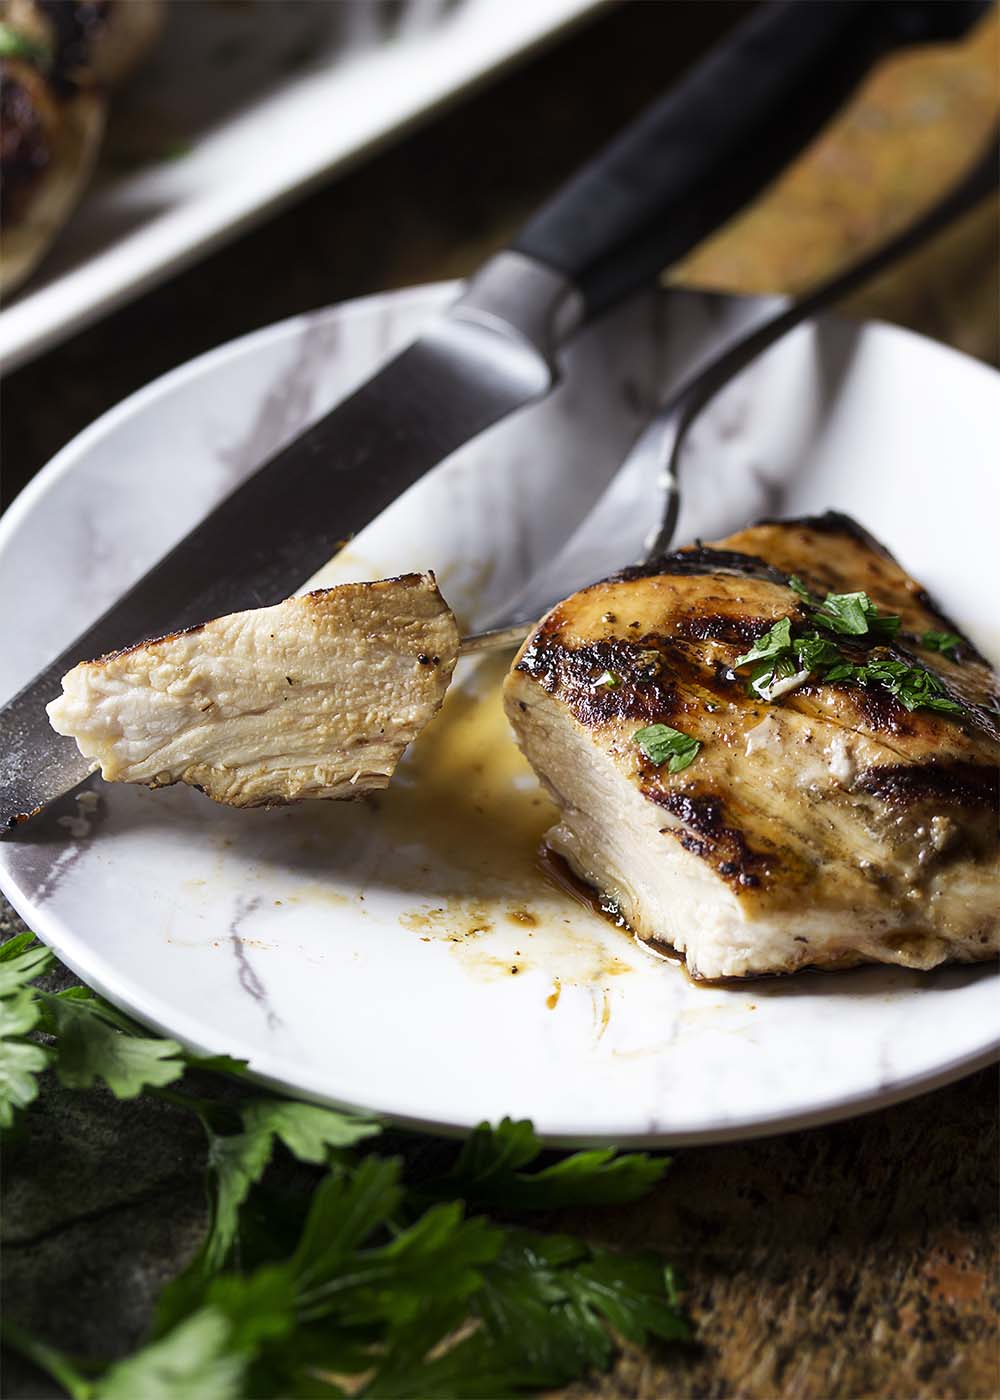 A piece of grilled balsamic chicken cut open showing the juicy, well cooked interior.